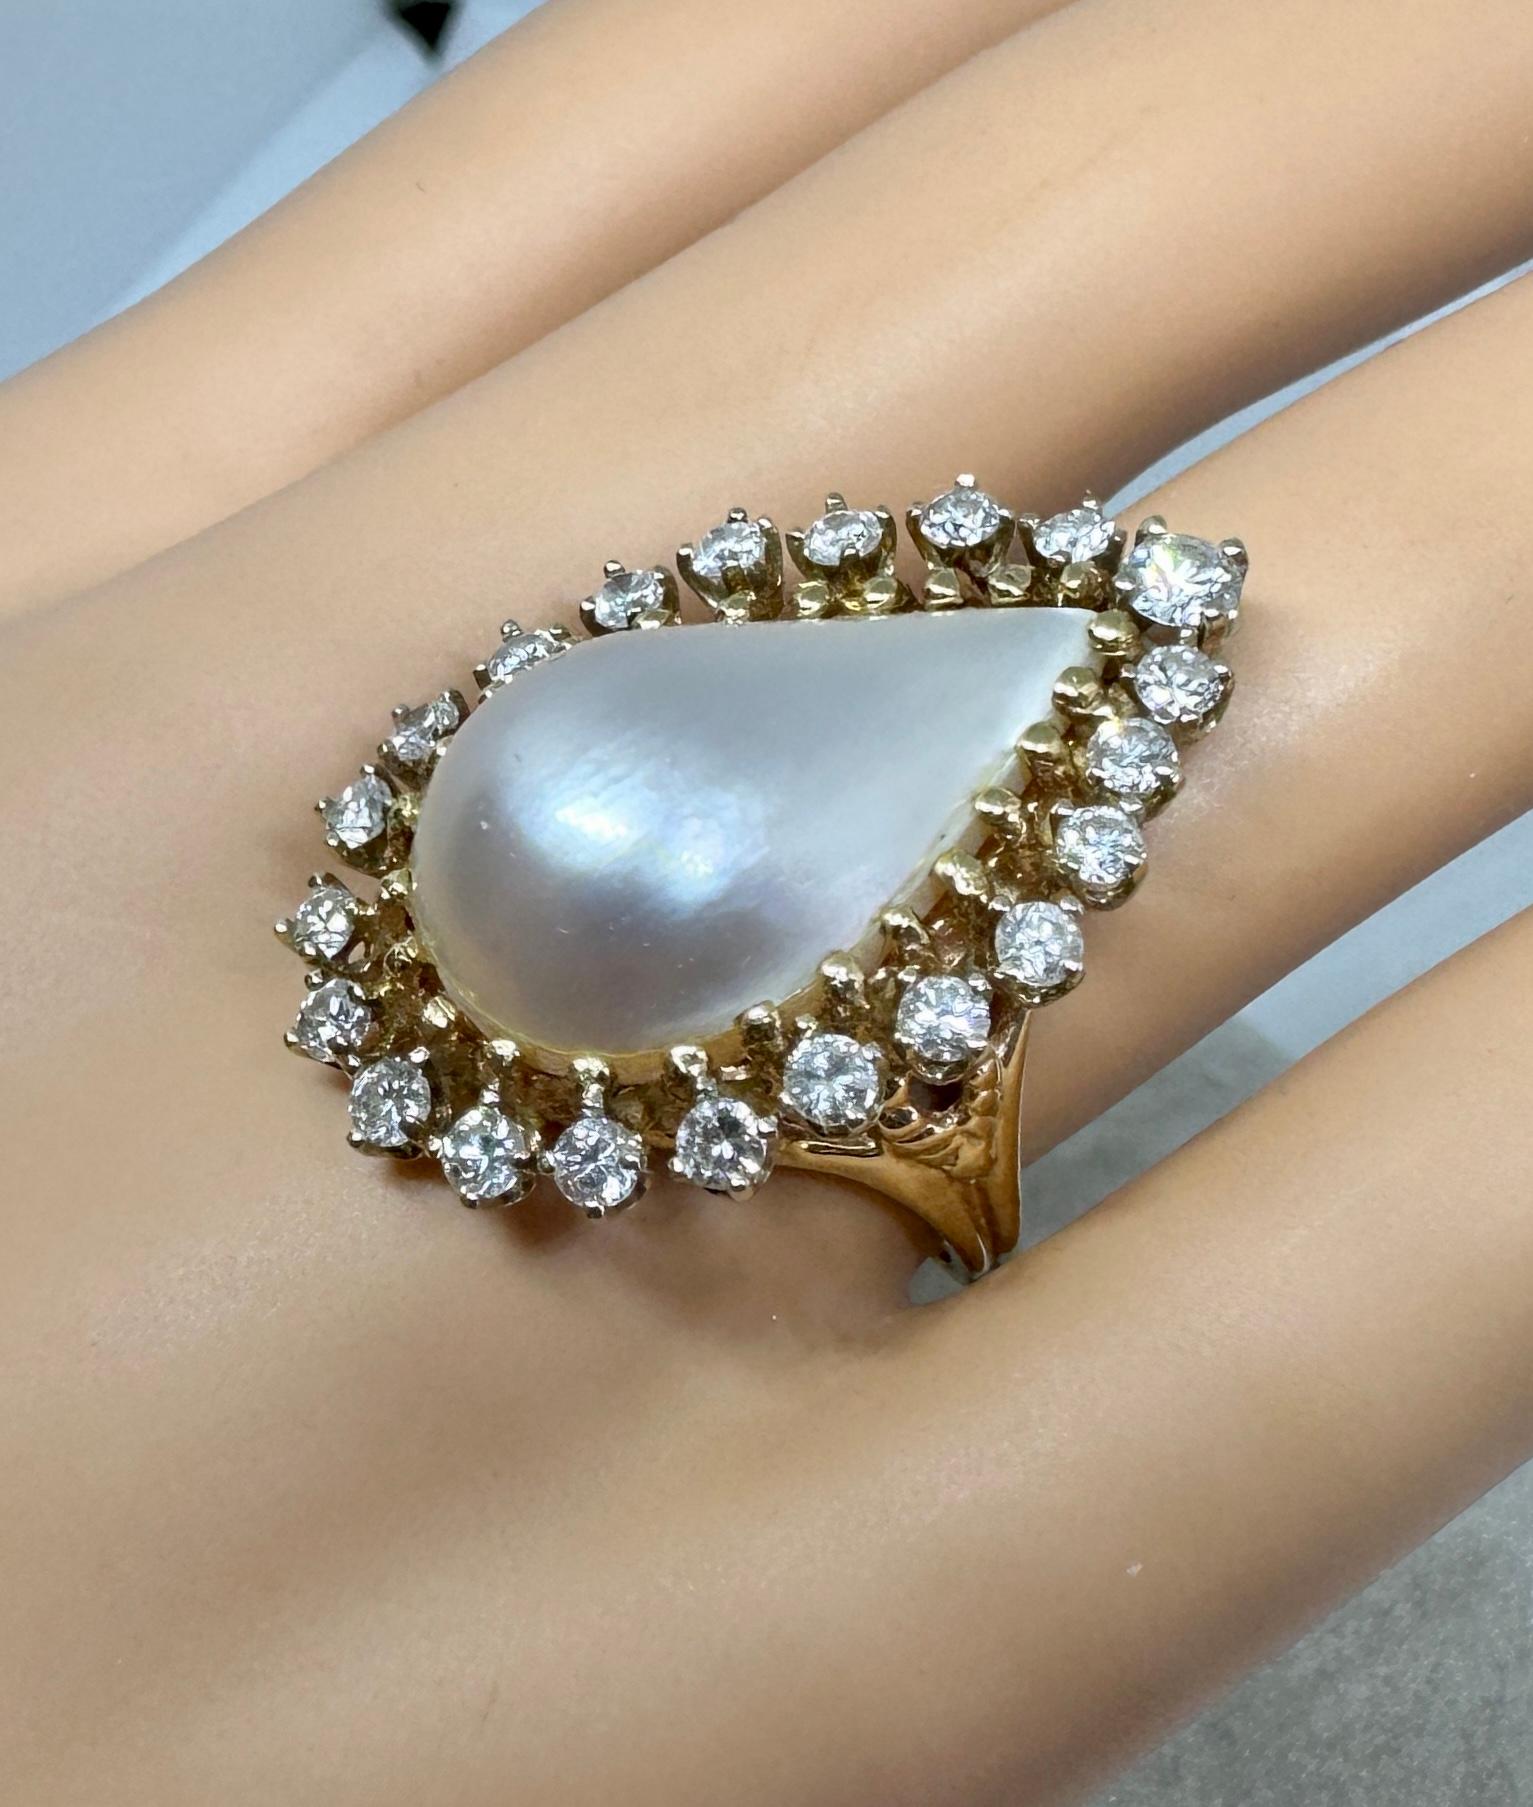 This is a gorgeous Mabe Pearl Cocktail Fashion Ring with a Halo of 21 Diamonds totaling approximately 2 Carats in 14 Karat Yellow and White Gold.  The ring is a Diamond and Pearl extravaganza at its most dramatic!  In the center is a magnificent